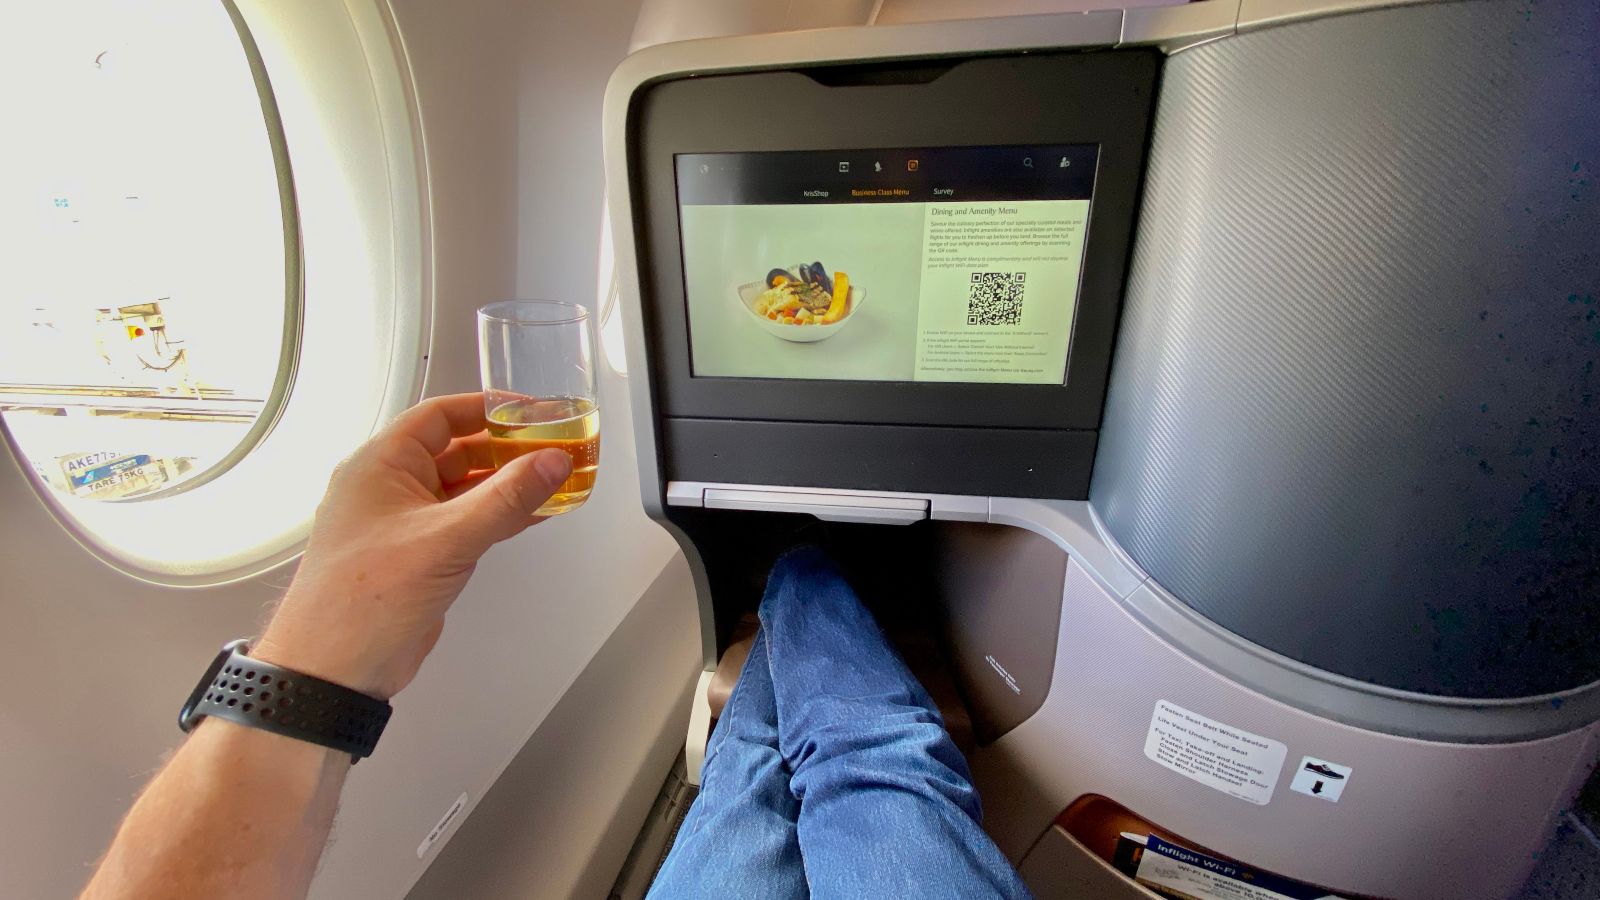 Singapore Airlines Business Class champagne